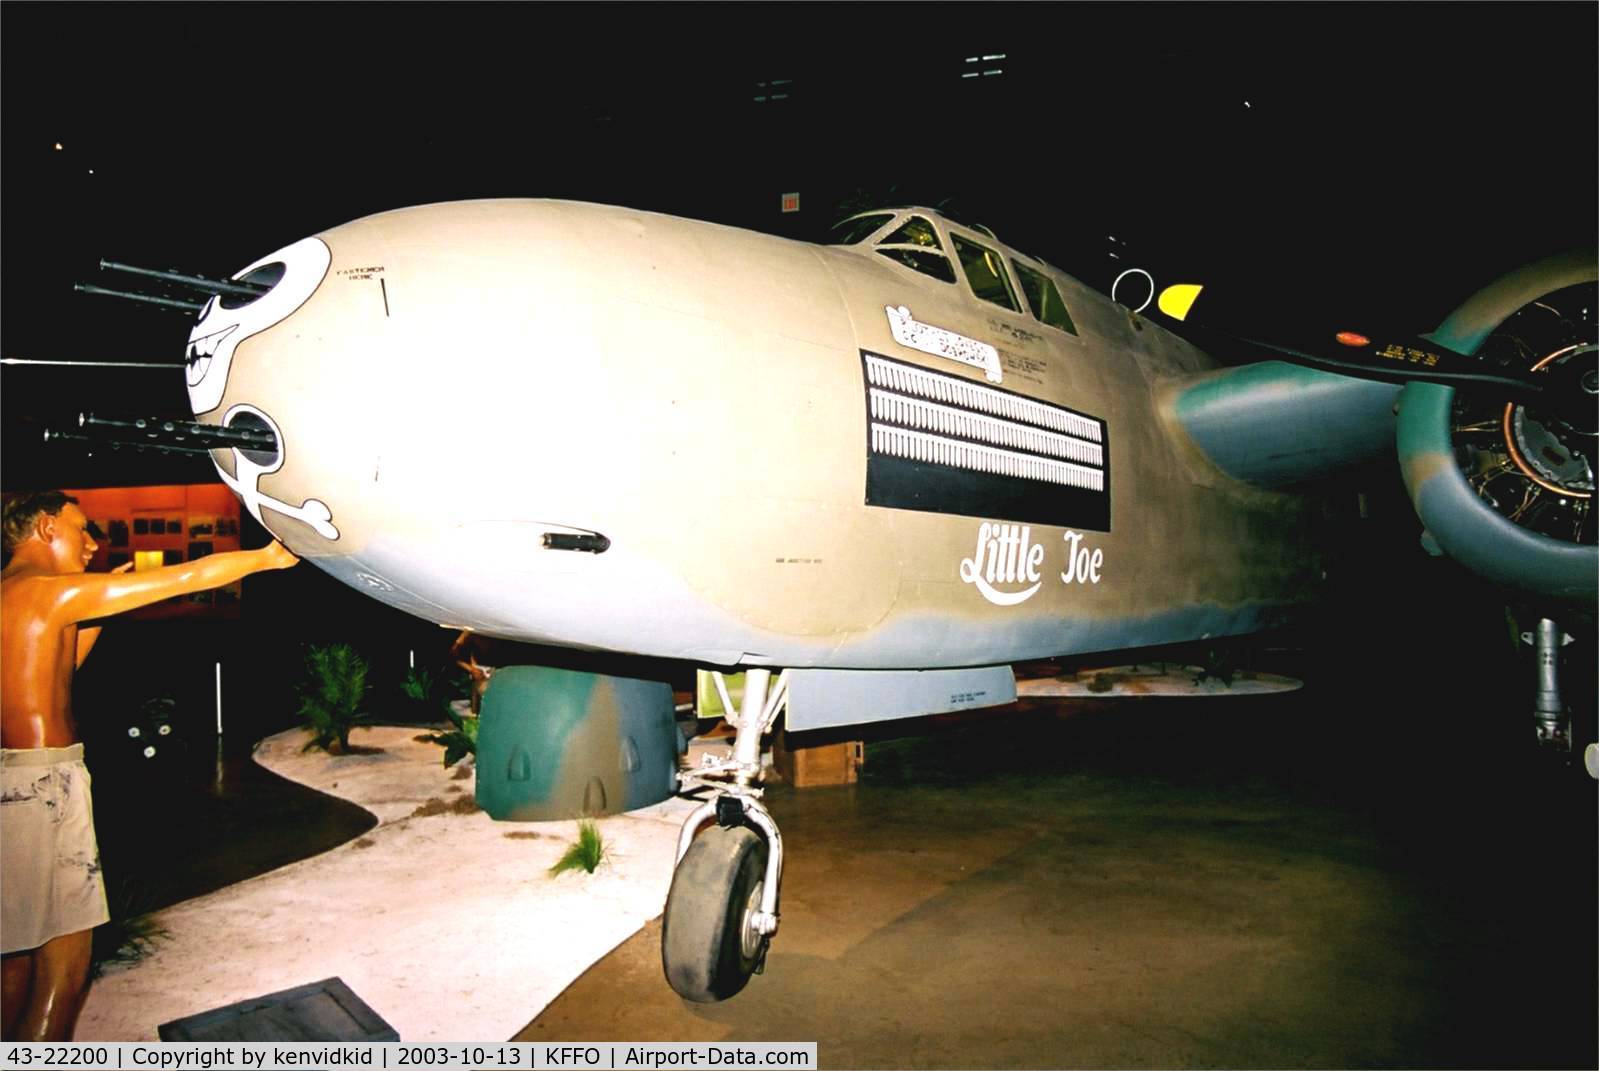 43-22200, 1943 Douglas A-20G Havoc C/N 21847, At the Museum of the United States Air Force Dayton Ohio.